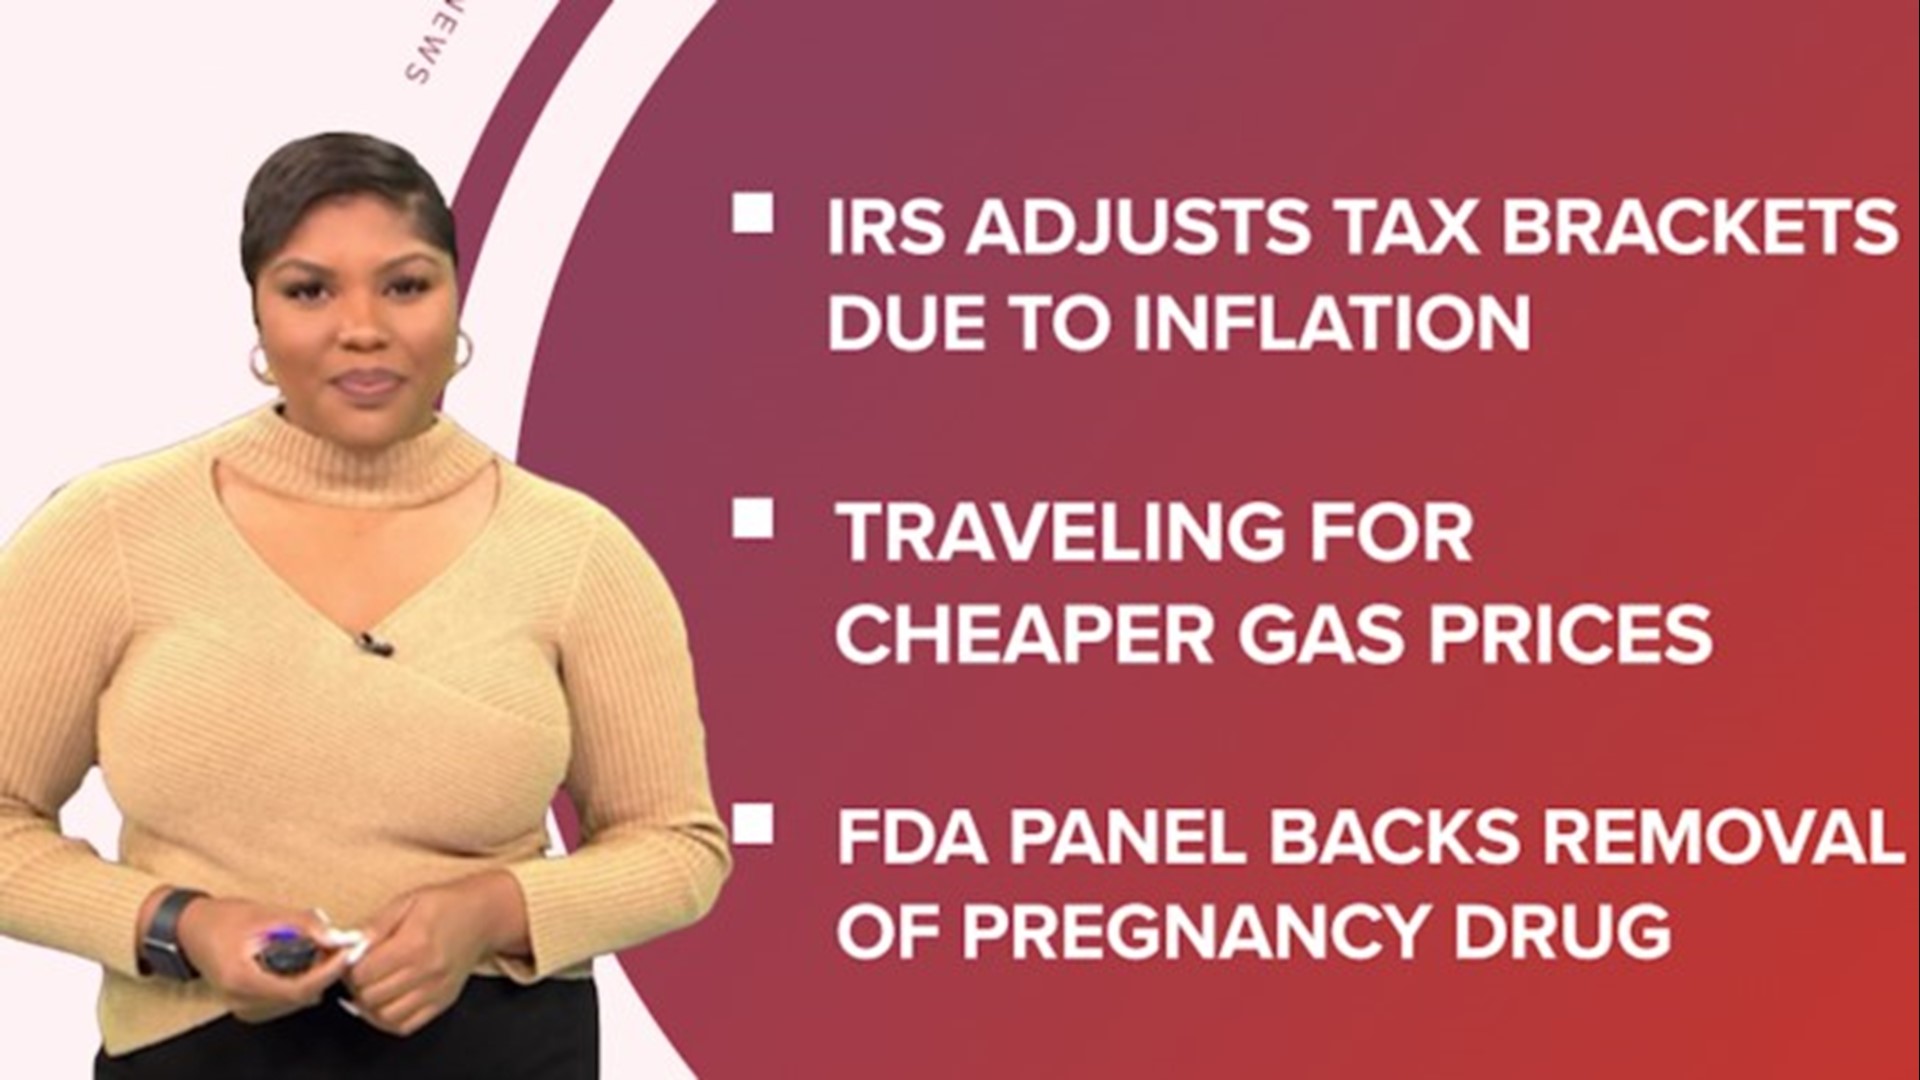 A look at what is happening in the news from the cost of driving around for cheaper gas to the IRS changing tax brackets and the impact of inflation on seniors.